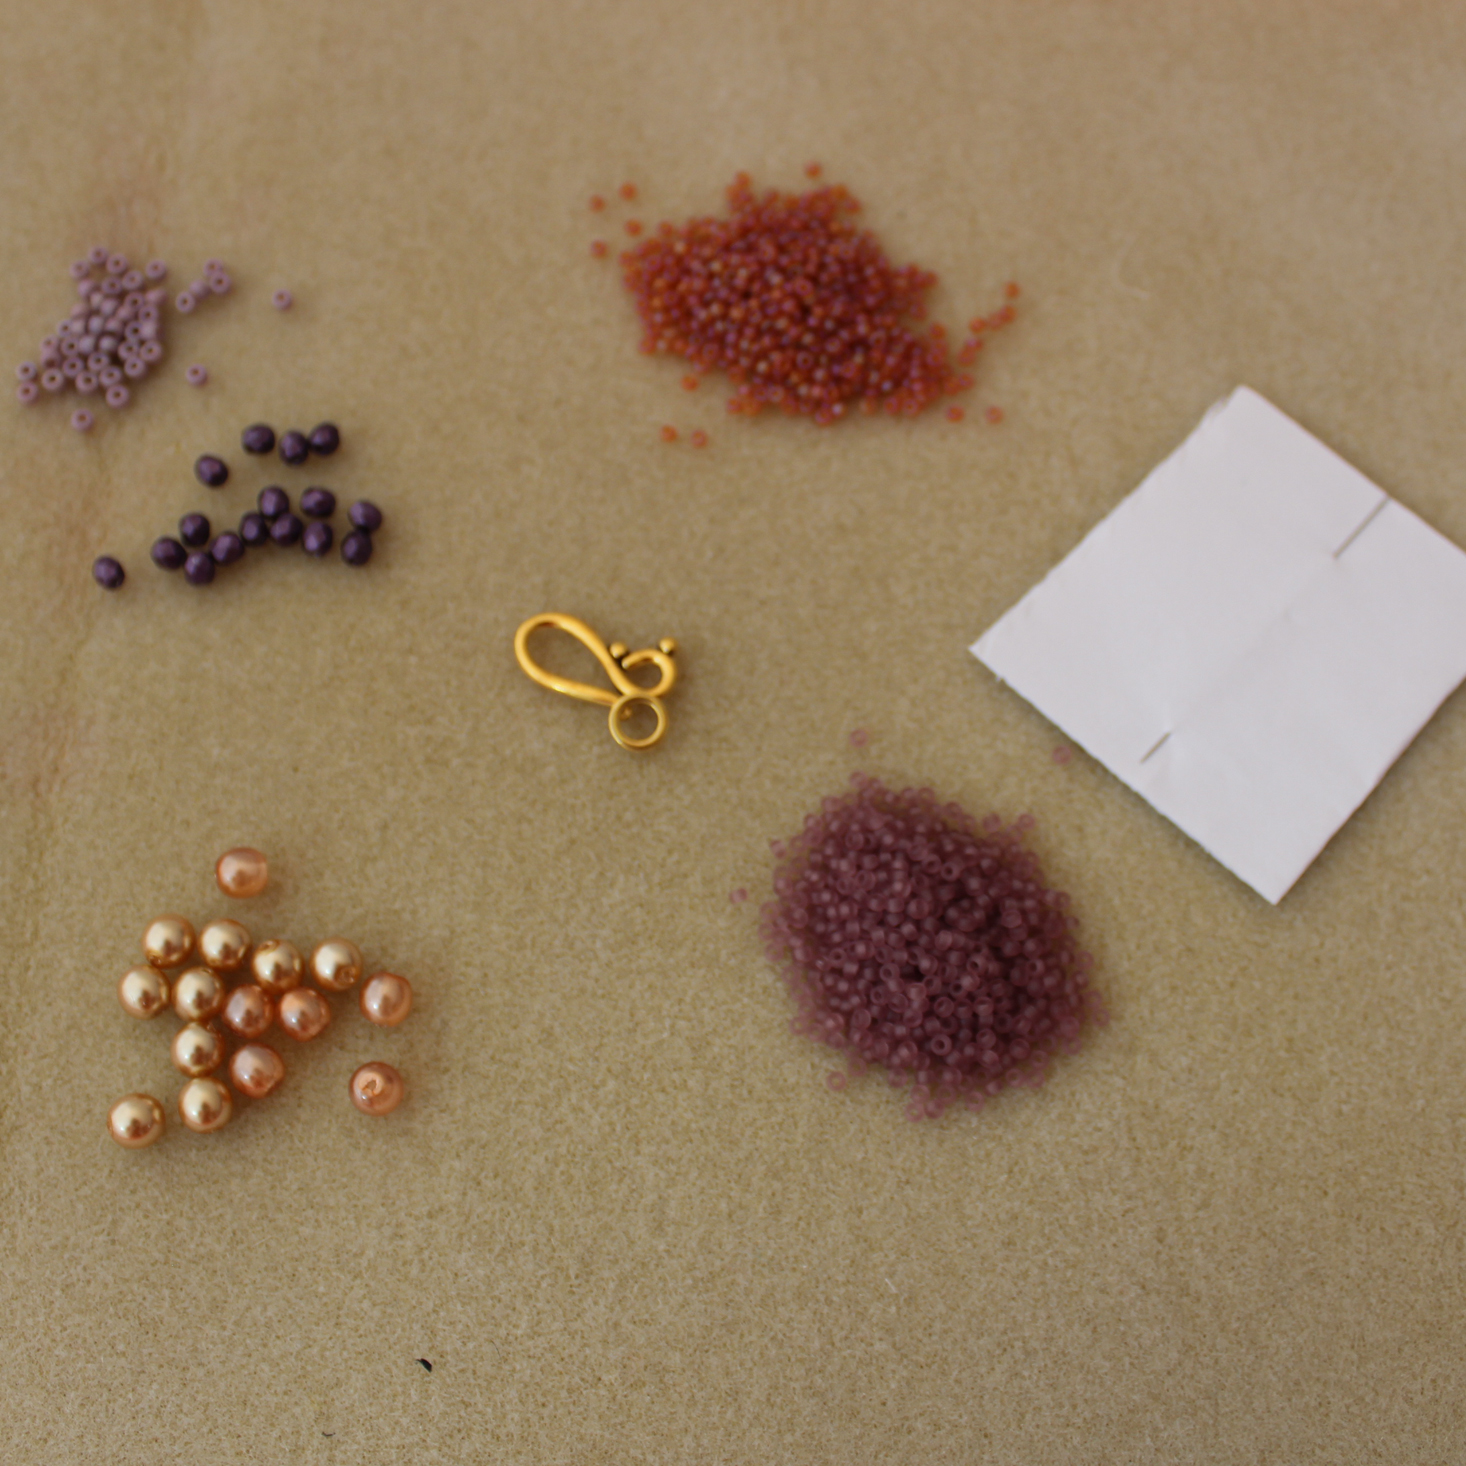 Facet Jewelry September 2019 Necklace Materials